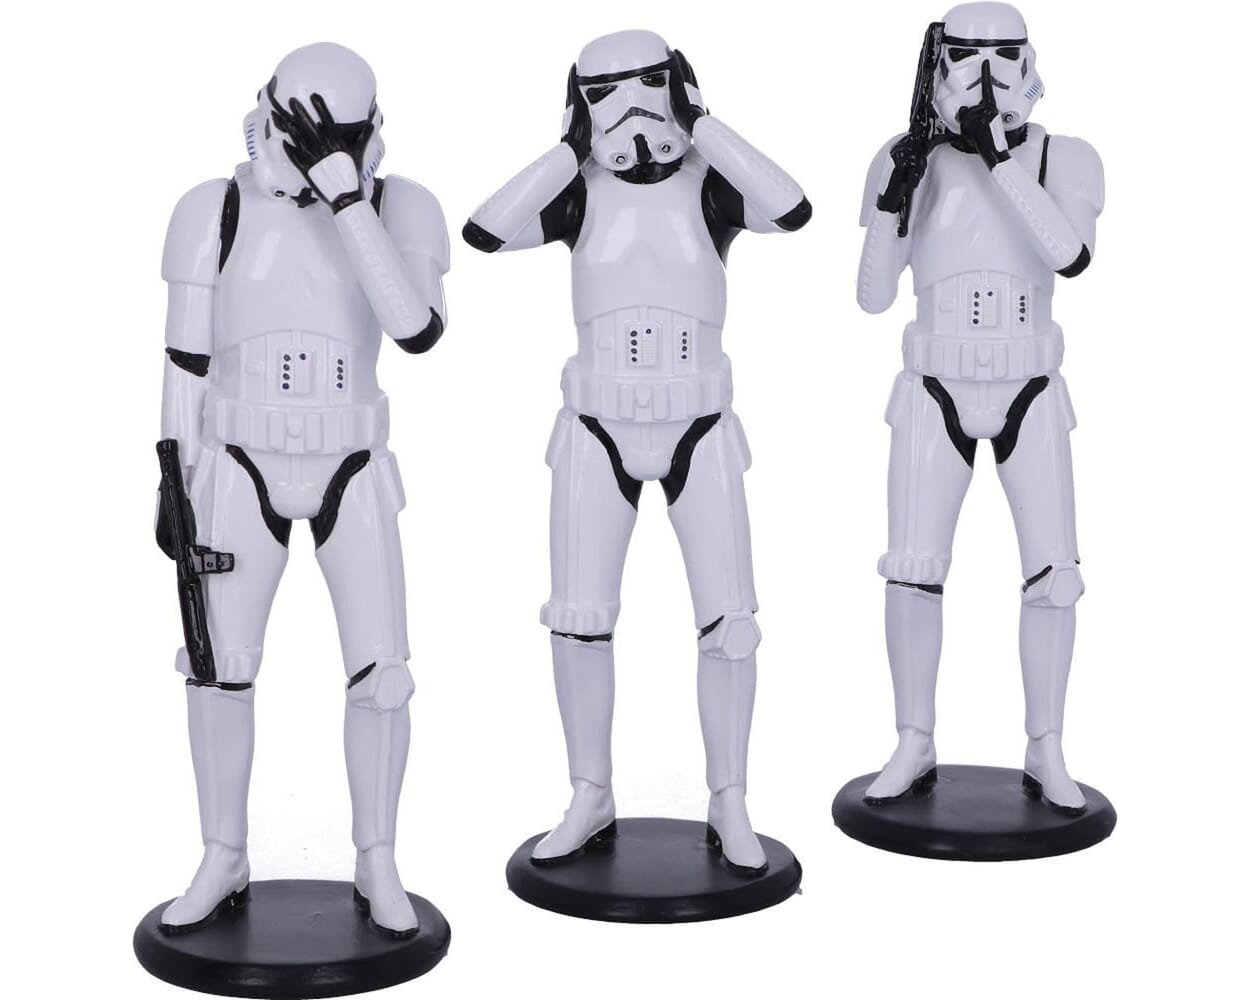 Nemesis Now, Three Wise Stormtroopers